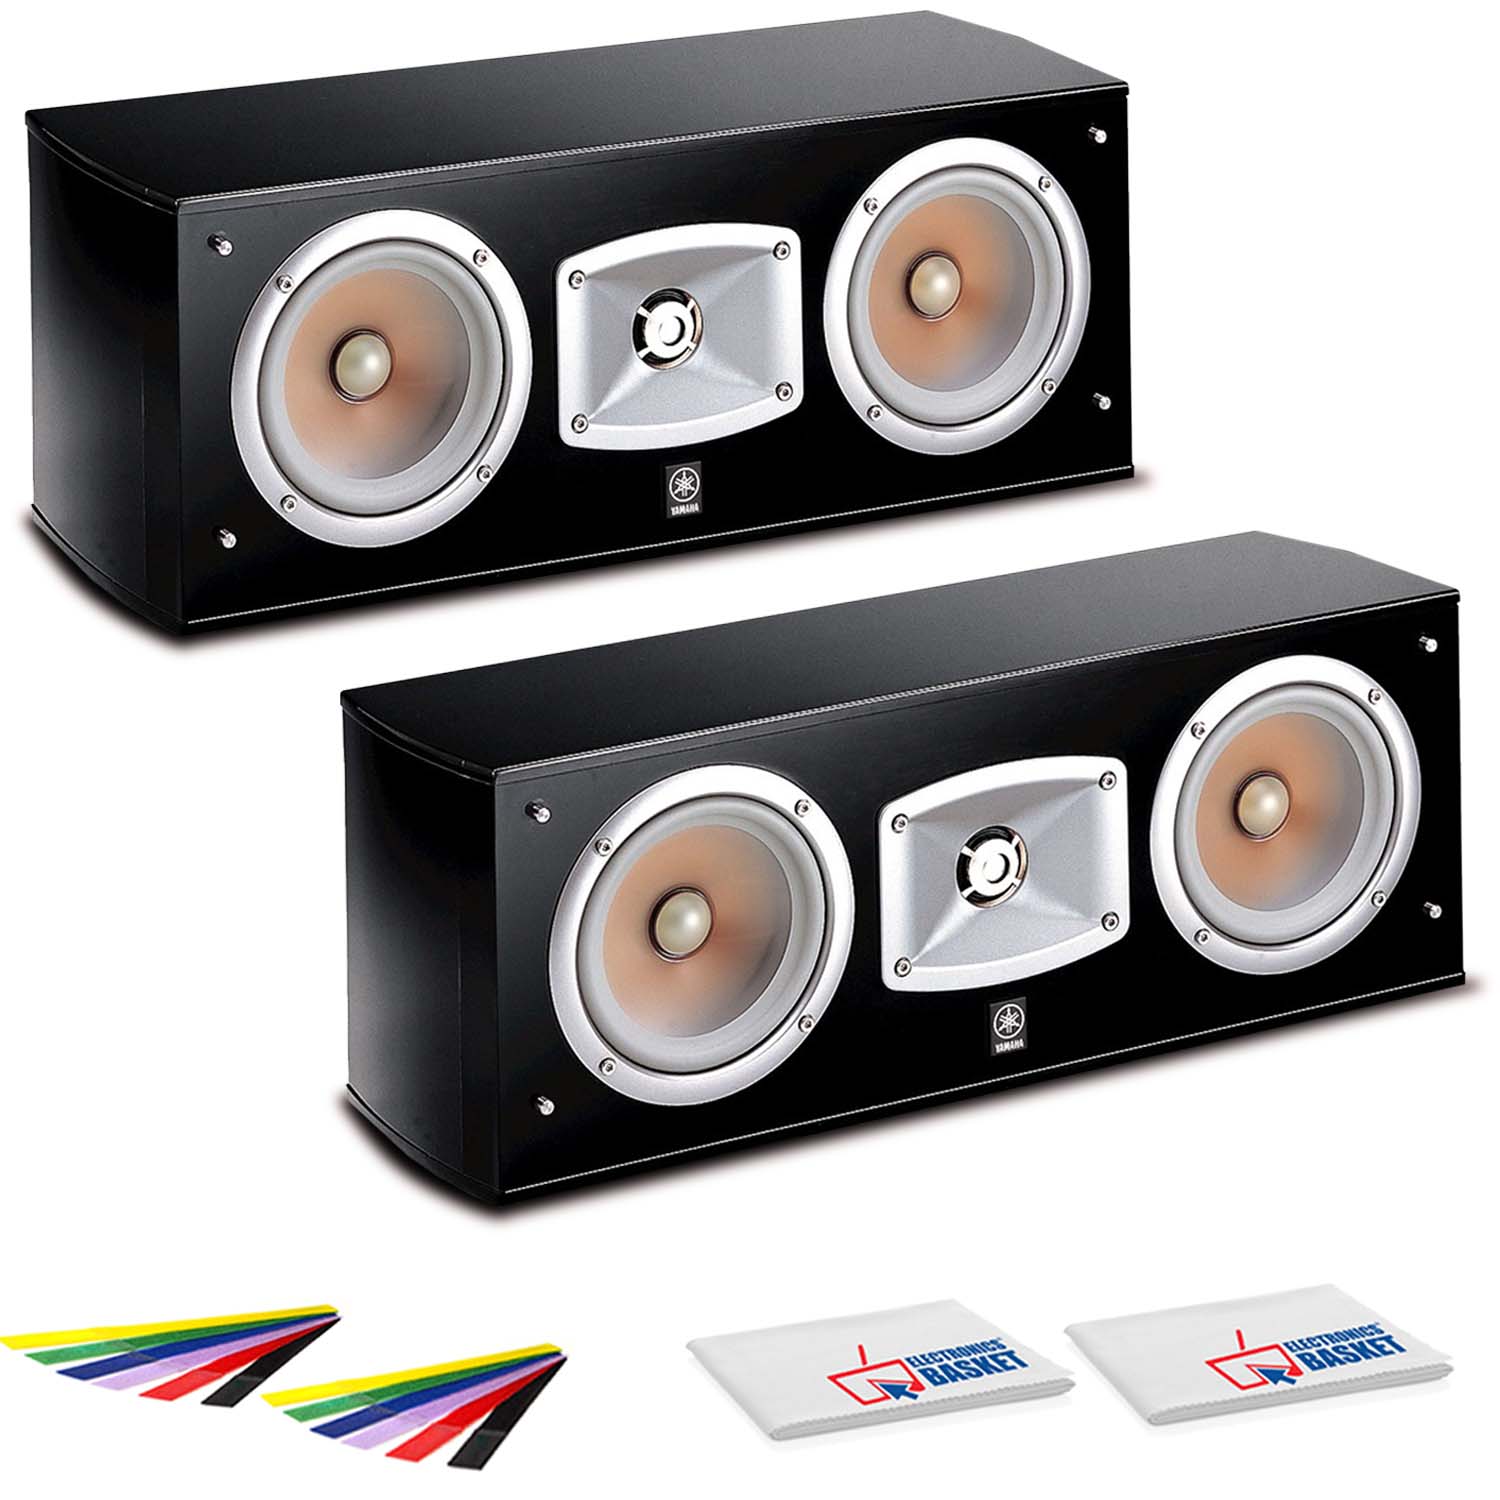 2 x Yamaha NS-C444 2-Way Center Channel Speaker (NS-C444) + 2 x Velcro Cable Straps + 2 x MicrofiberFiber Cloth - image 1 of 1